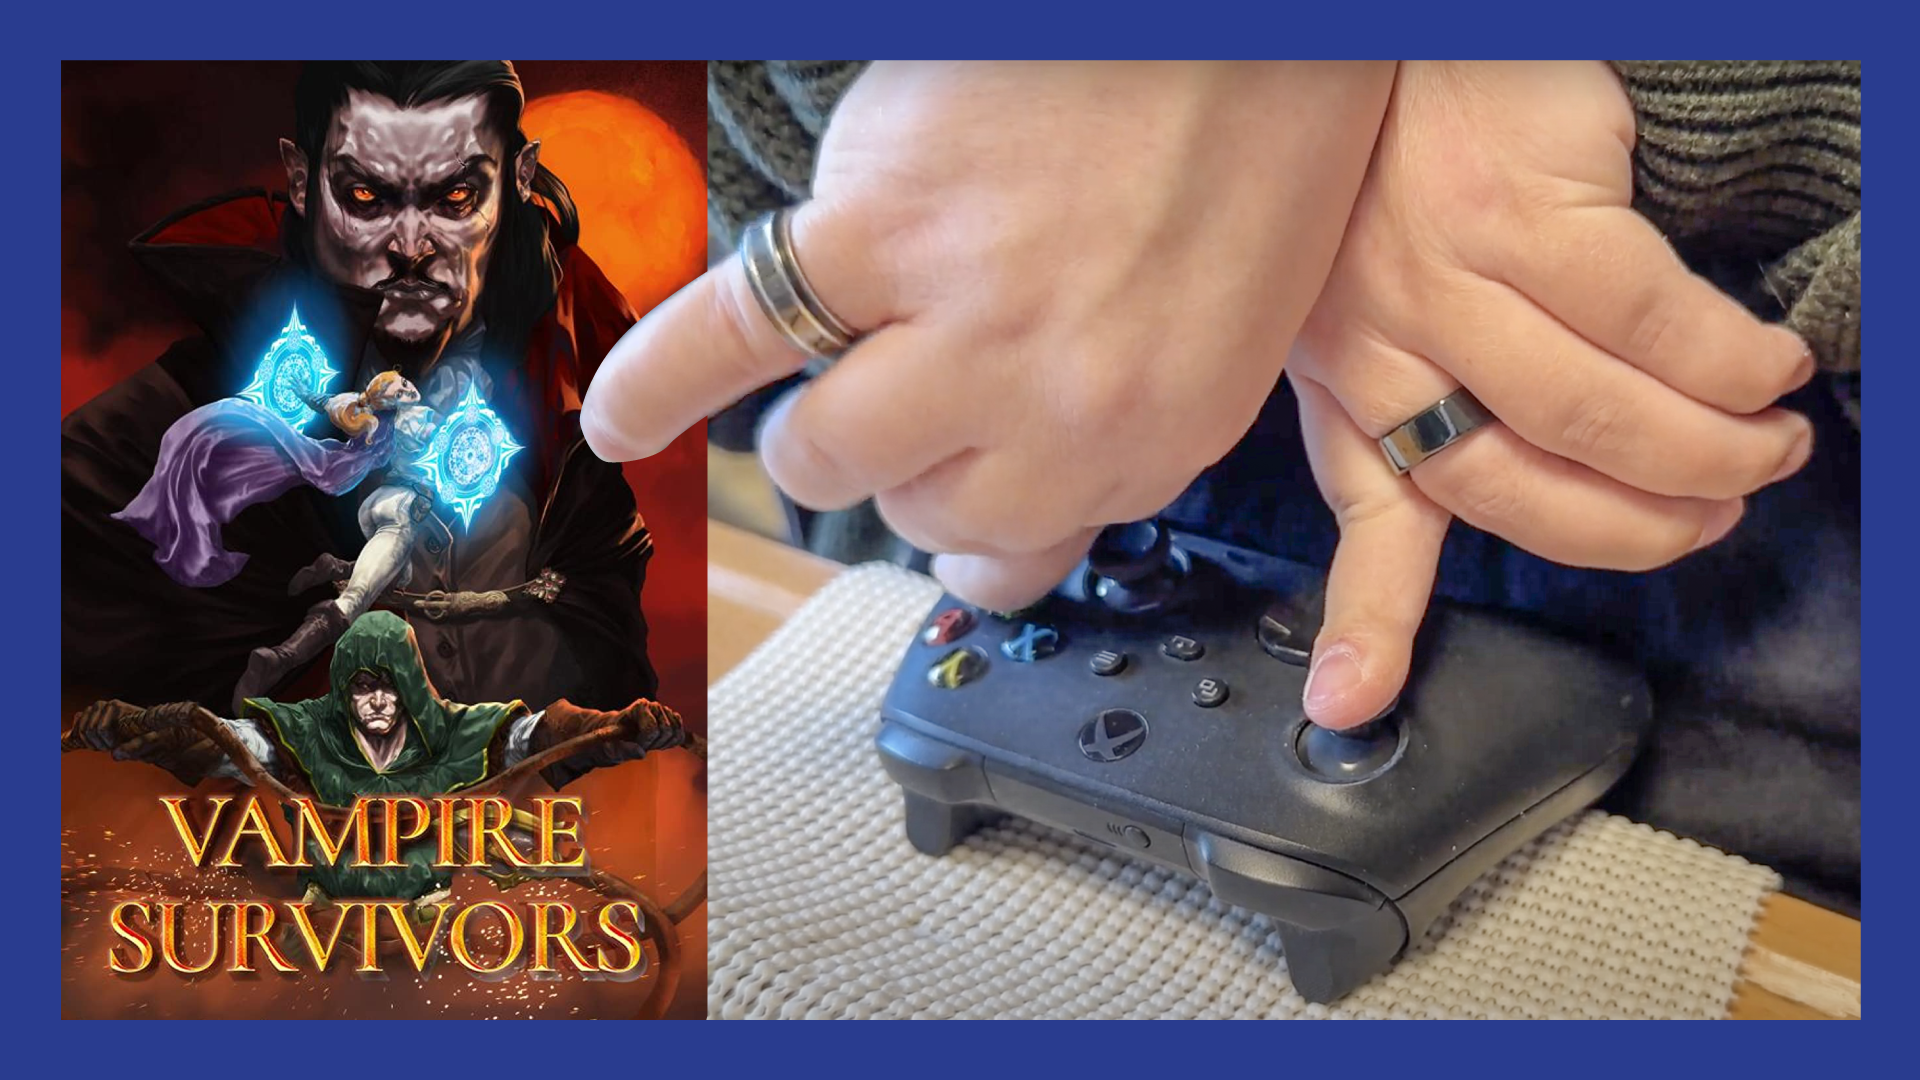 Vampire Survivor cover next to a closeup of two hands working the game controller